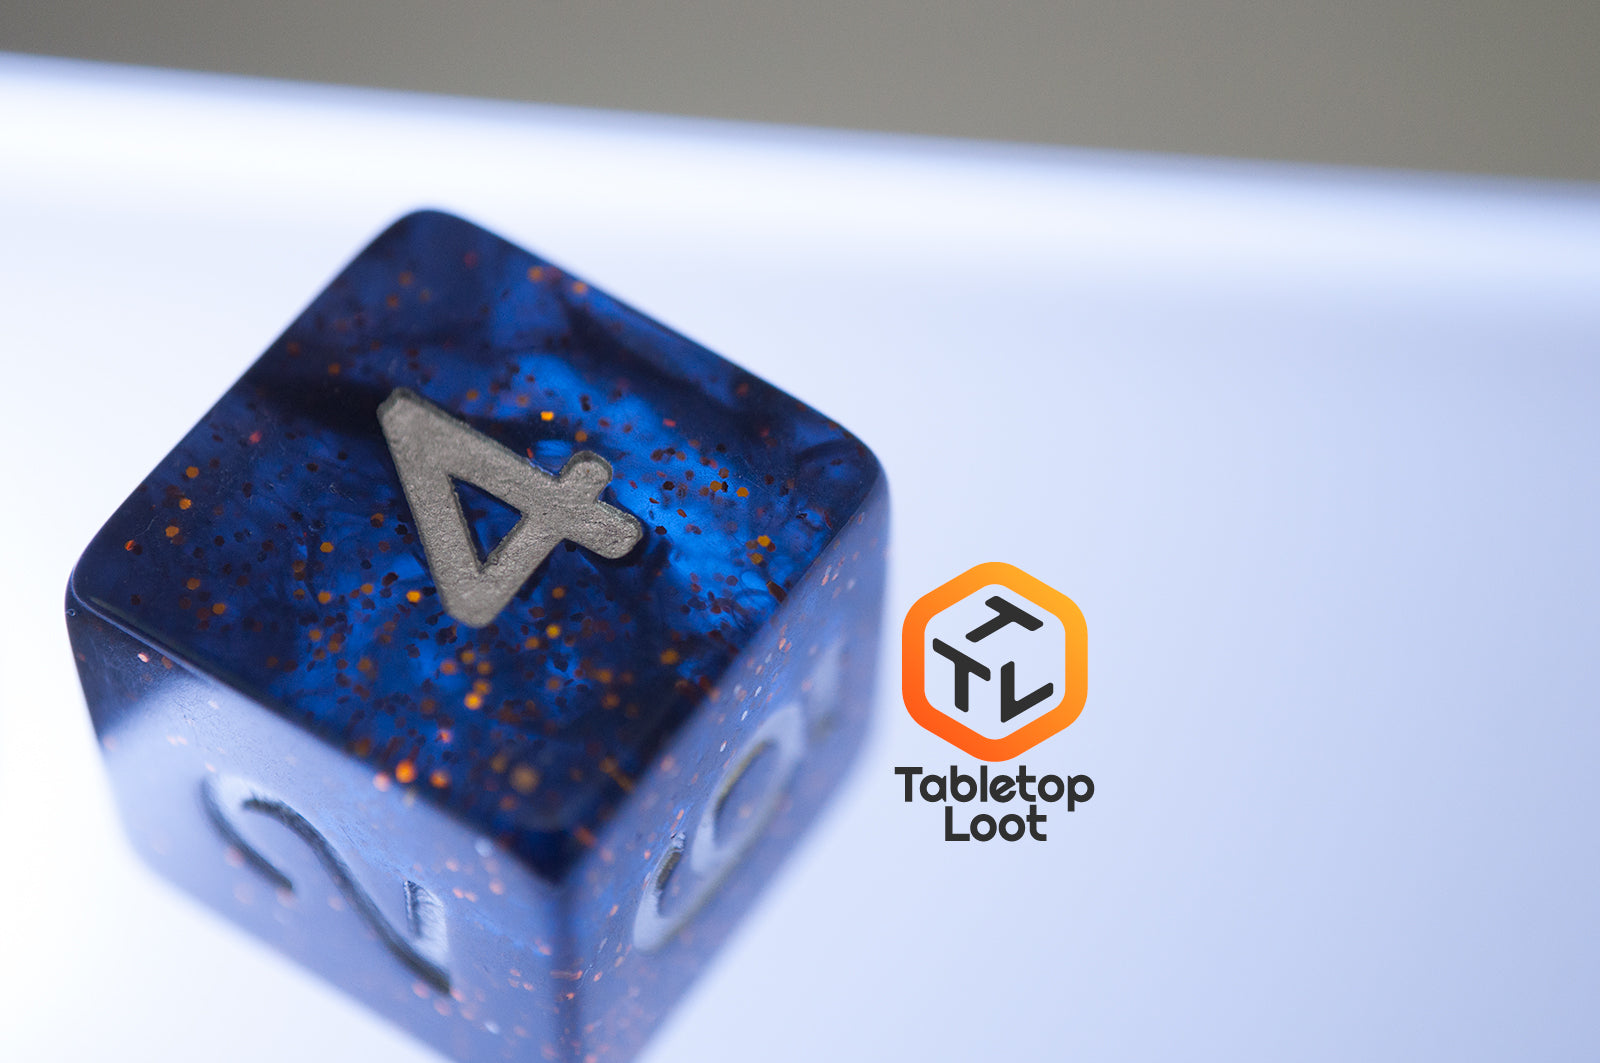 The Midnight Sky 7 piece dice set from Tabletop Loot with dark navy blue resin, gold glitter, and silver numbering.